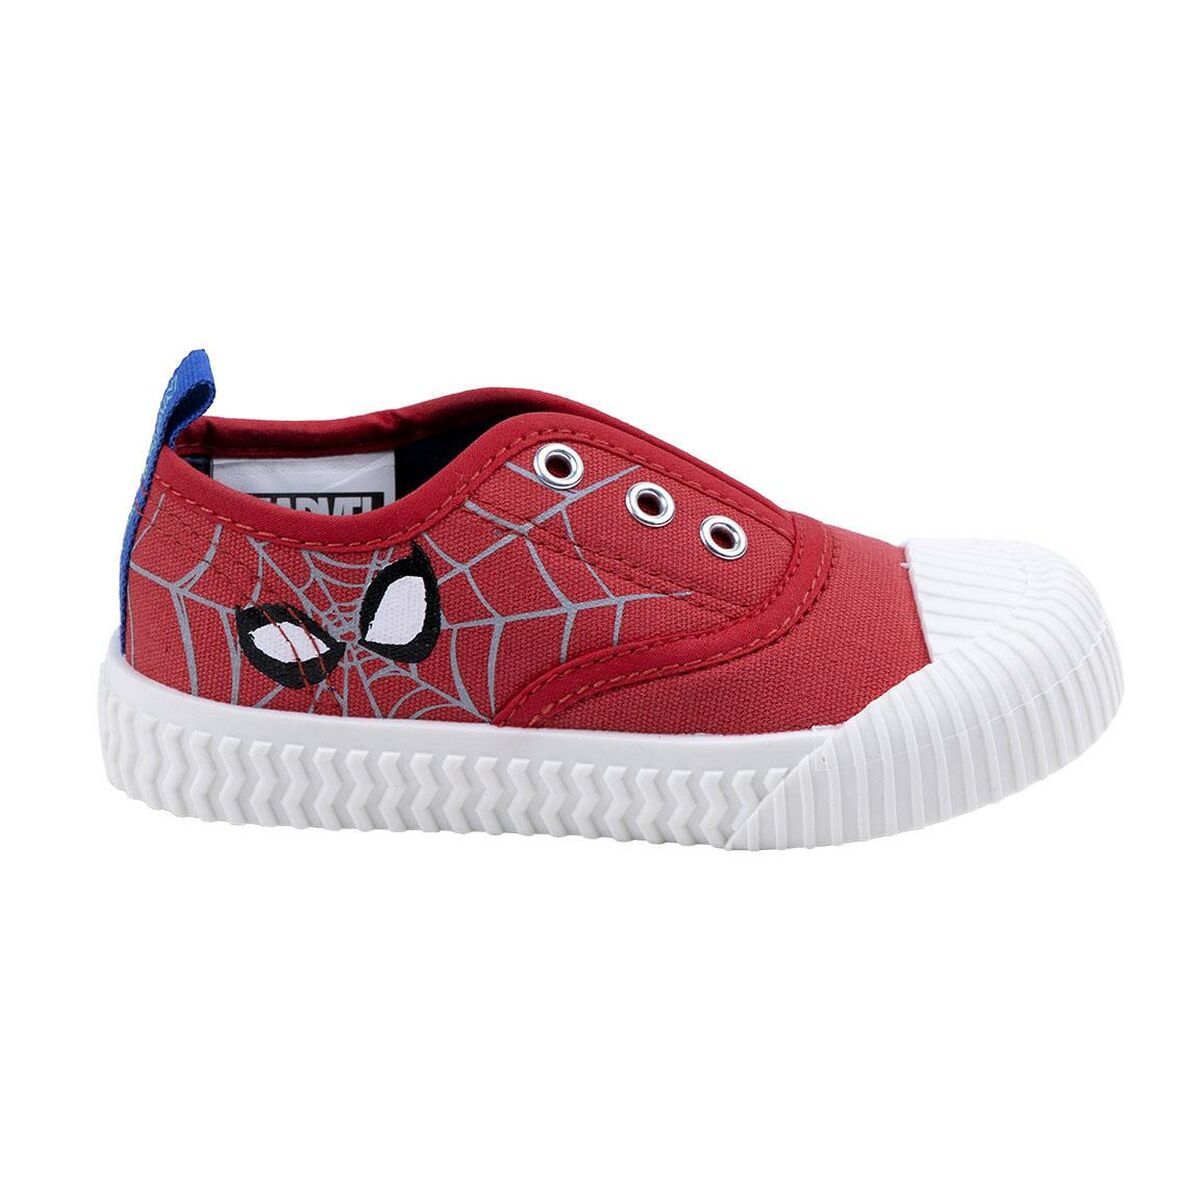 Chaussures casual enfant Spider-Man Rouge